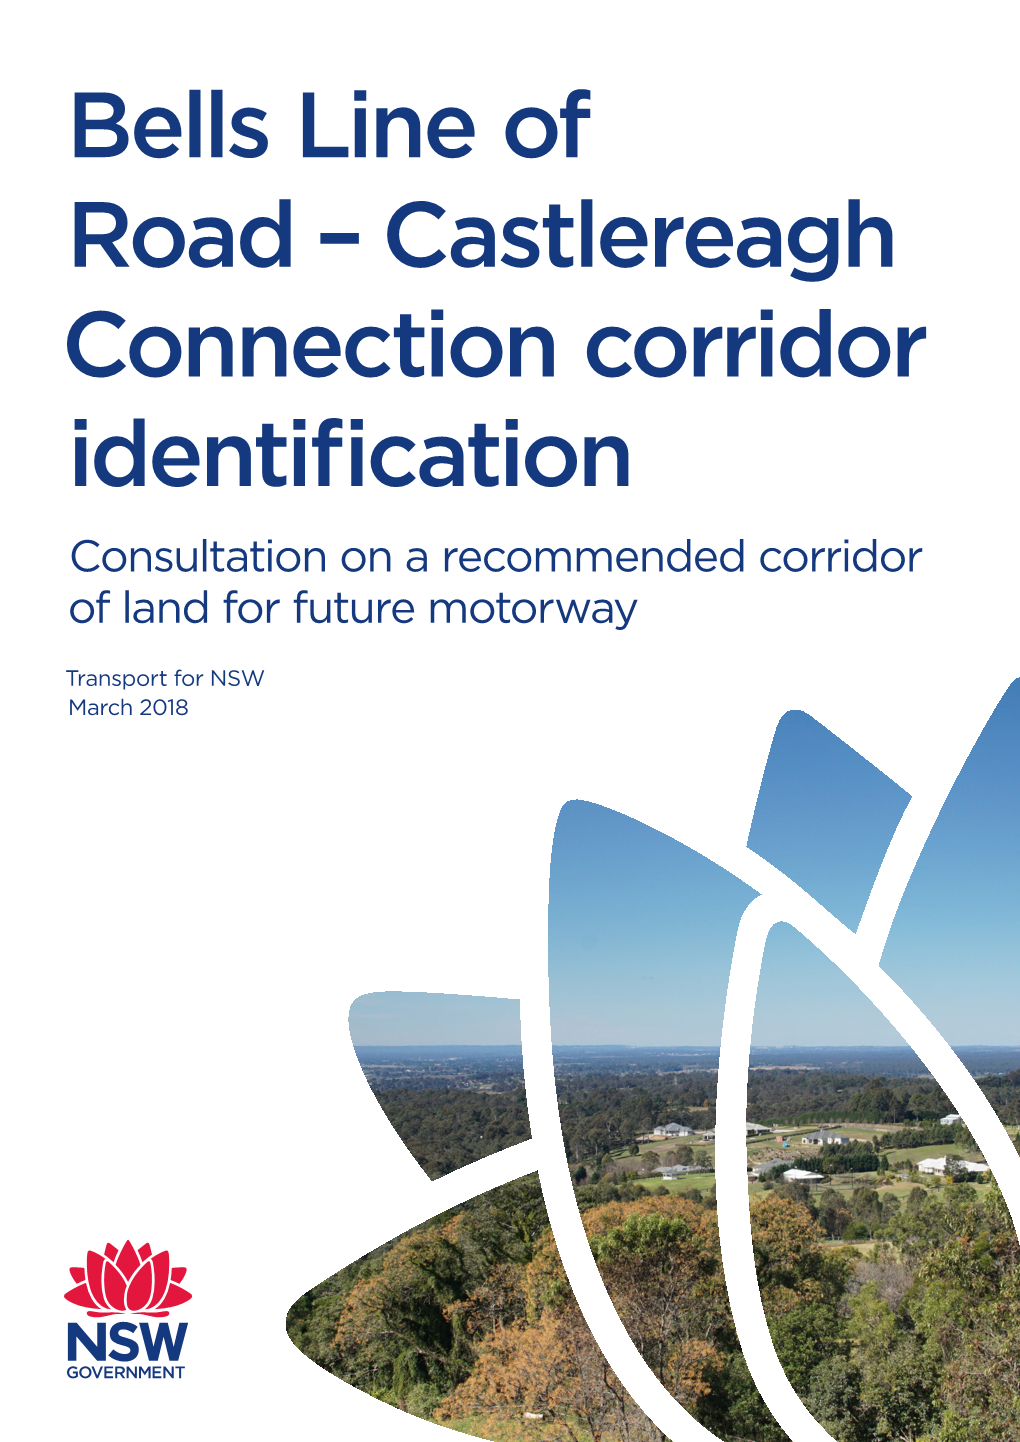 Bells Line of Road – Castlereagh Connection Corridor Identification Consultation on a Recommended Corridor of Land for Future Motorway